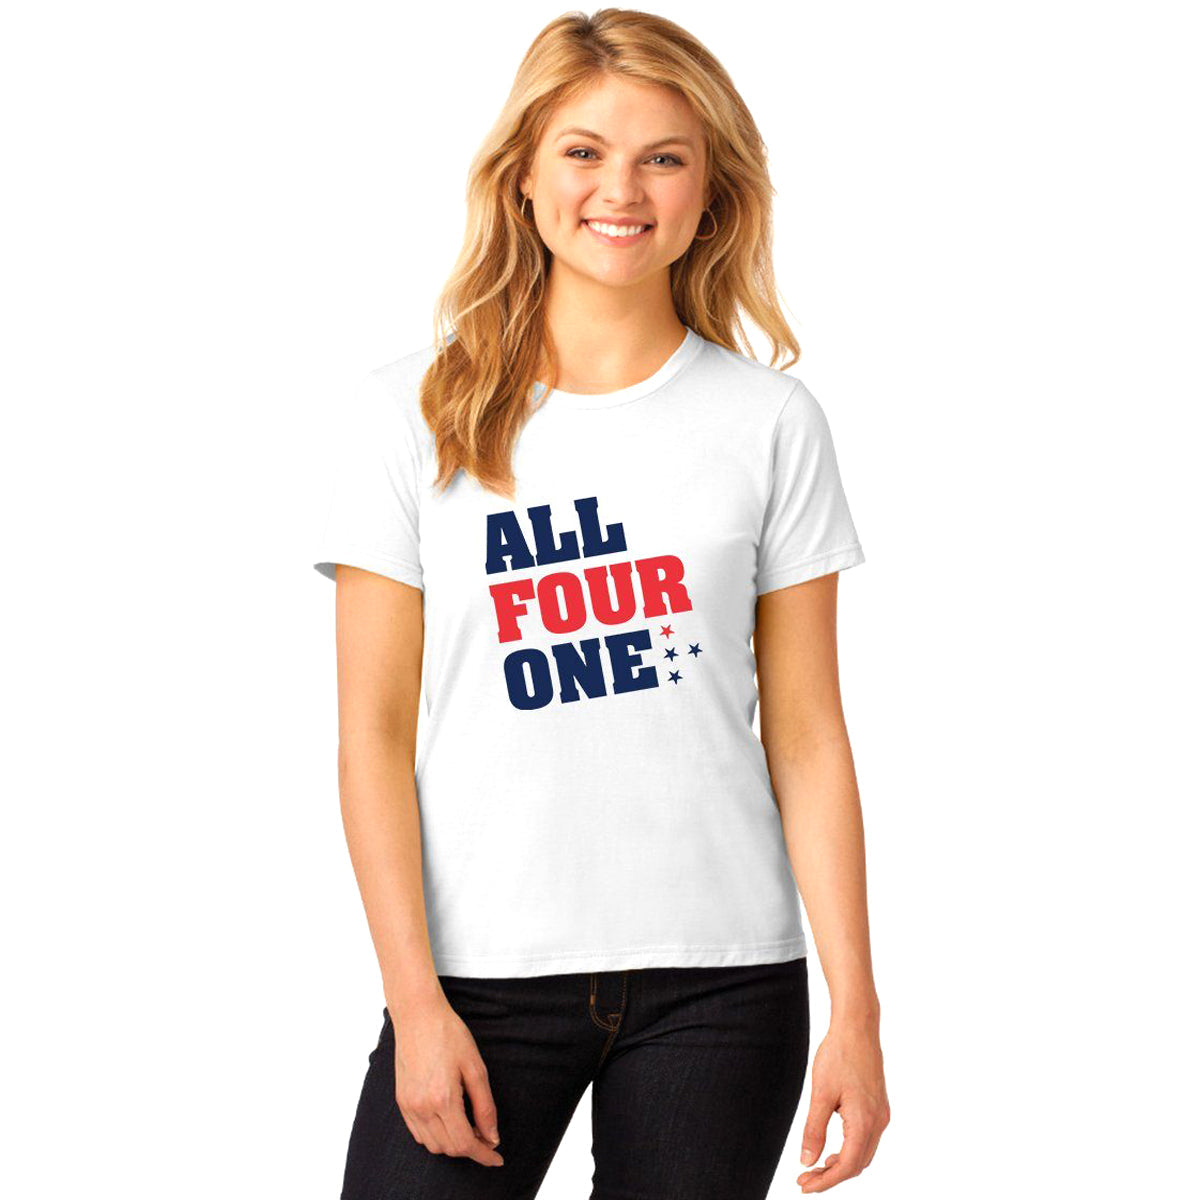 USA World Cup 2019 Champions Shirt - All 4 one T-shirts 411 Small White Women's